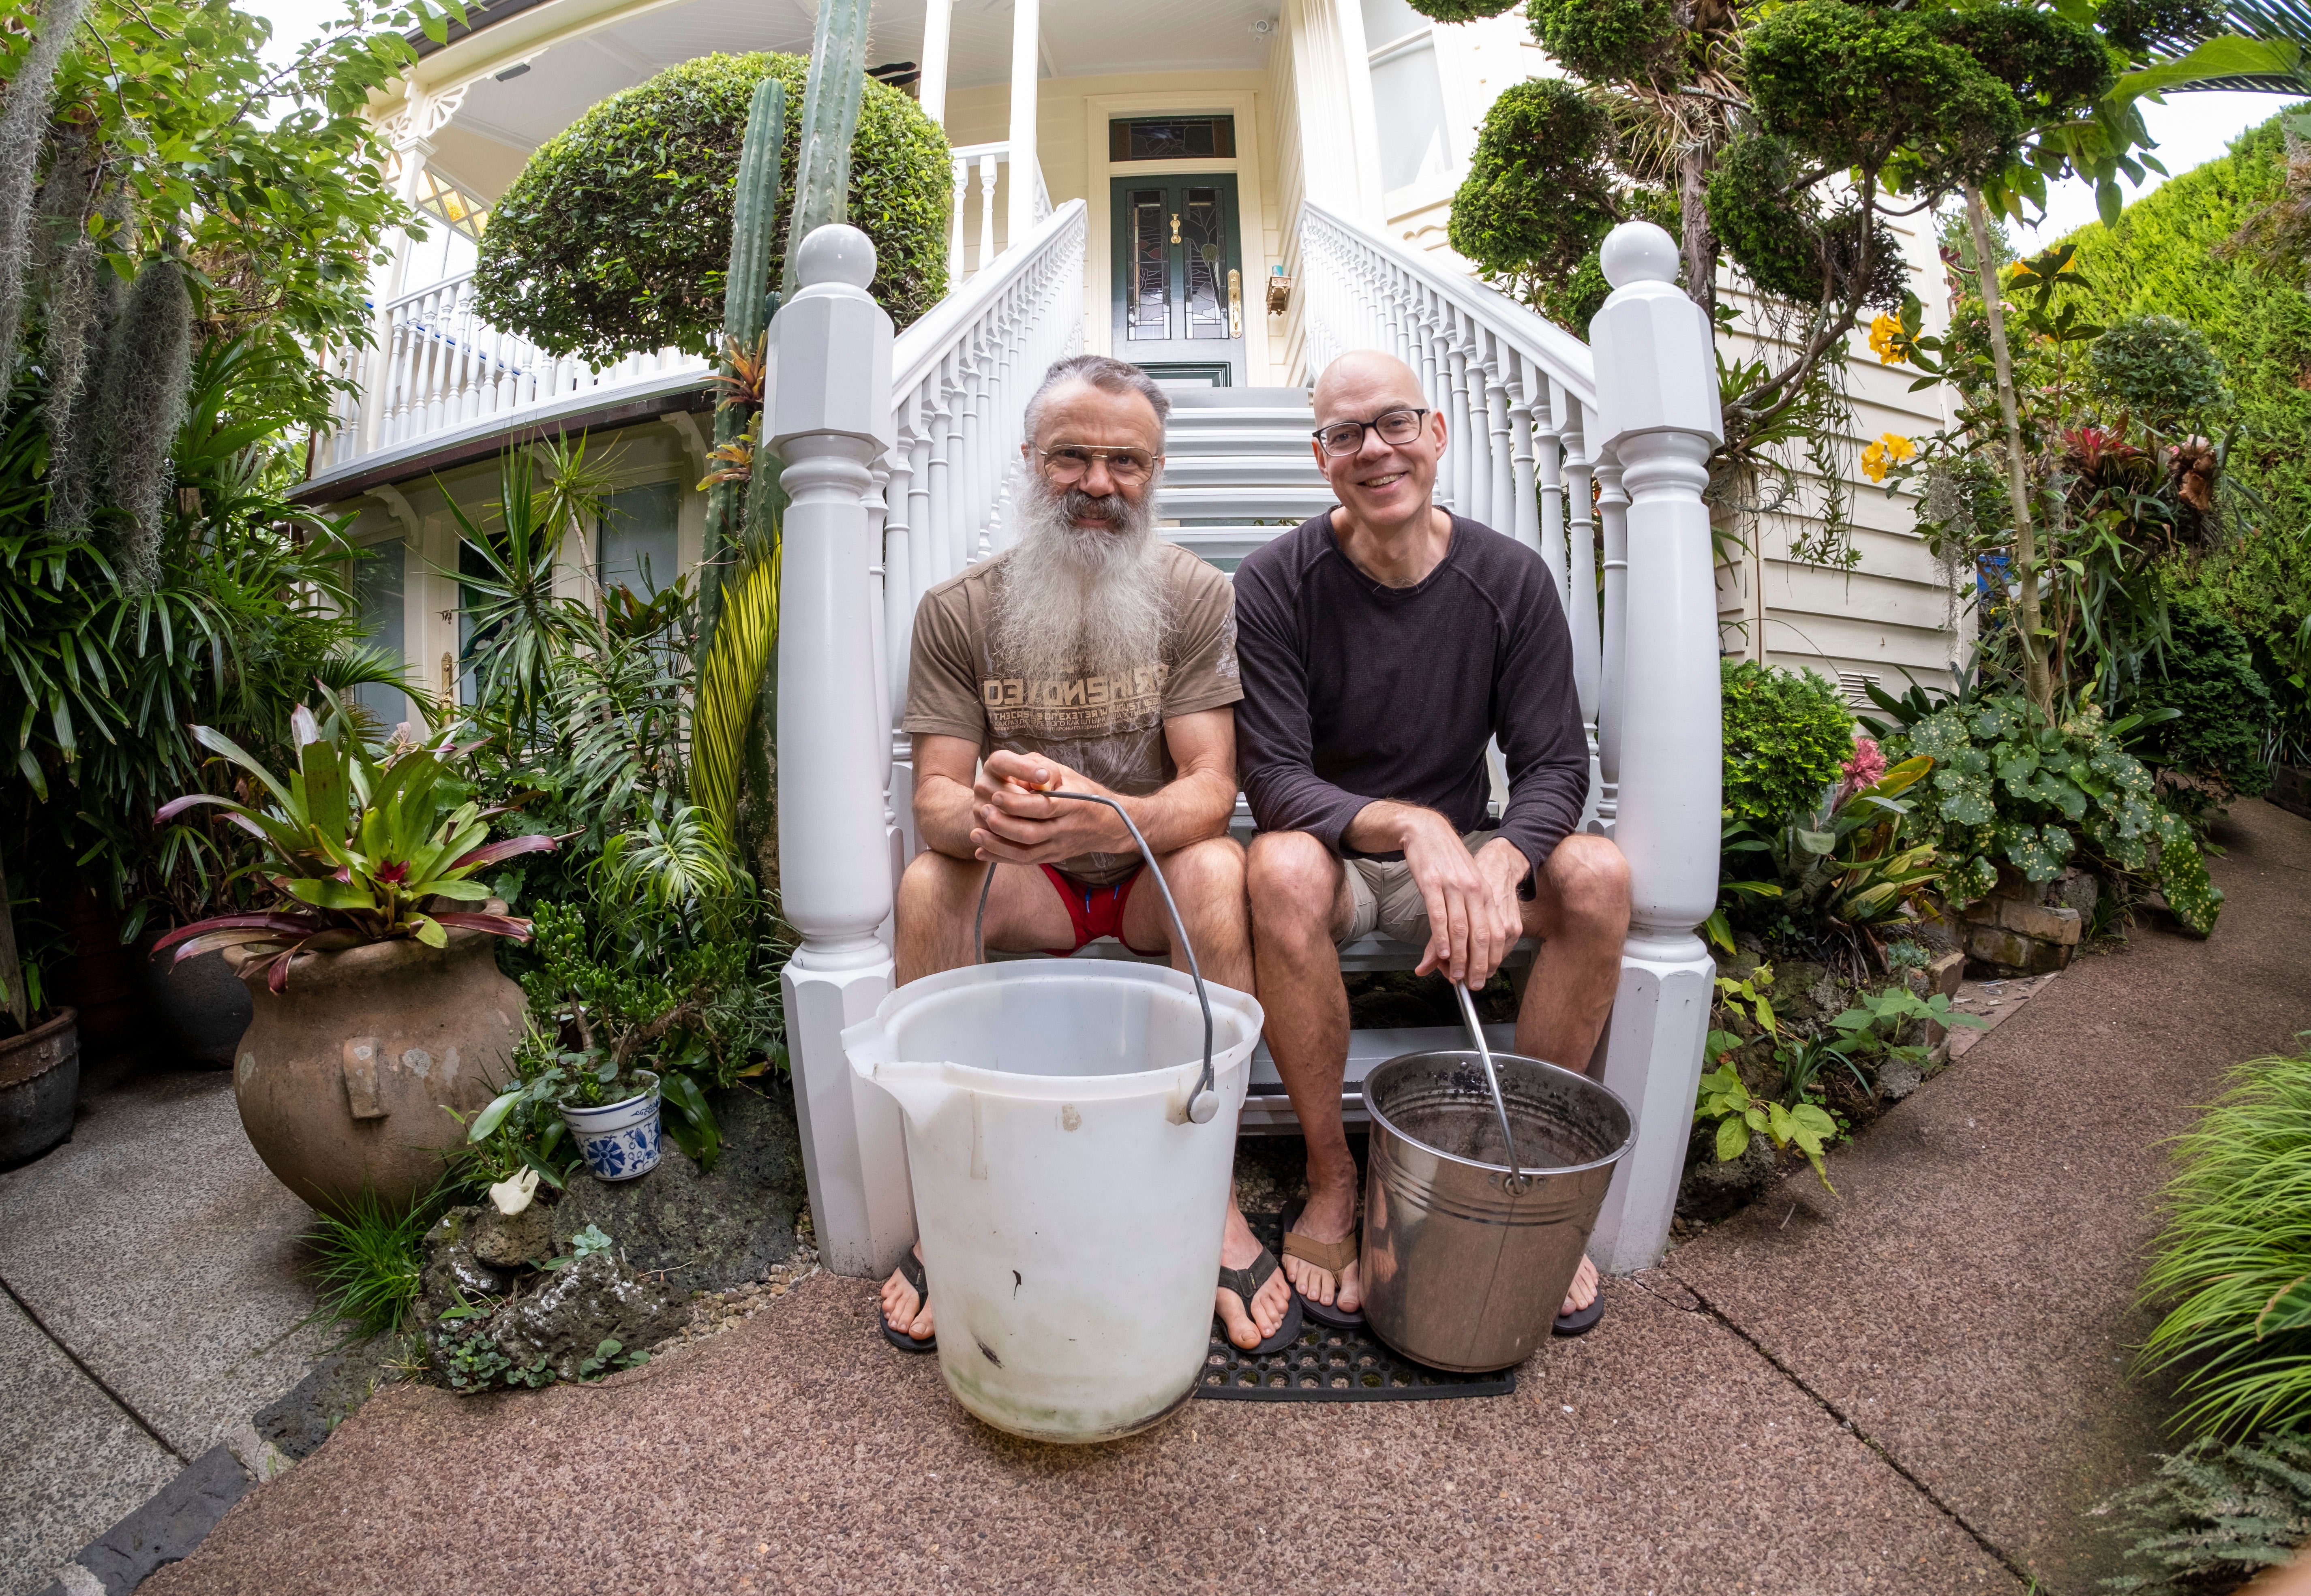 Mark and Gene sit on their front steps with buckets they use to water their garden.